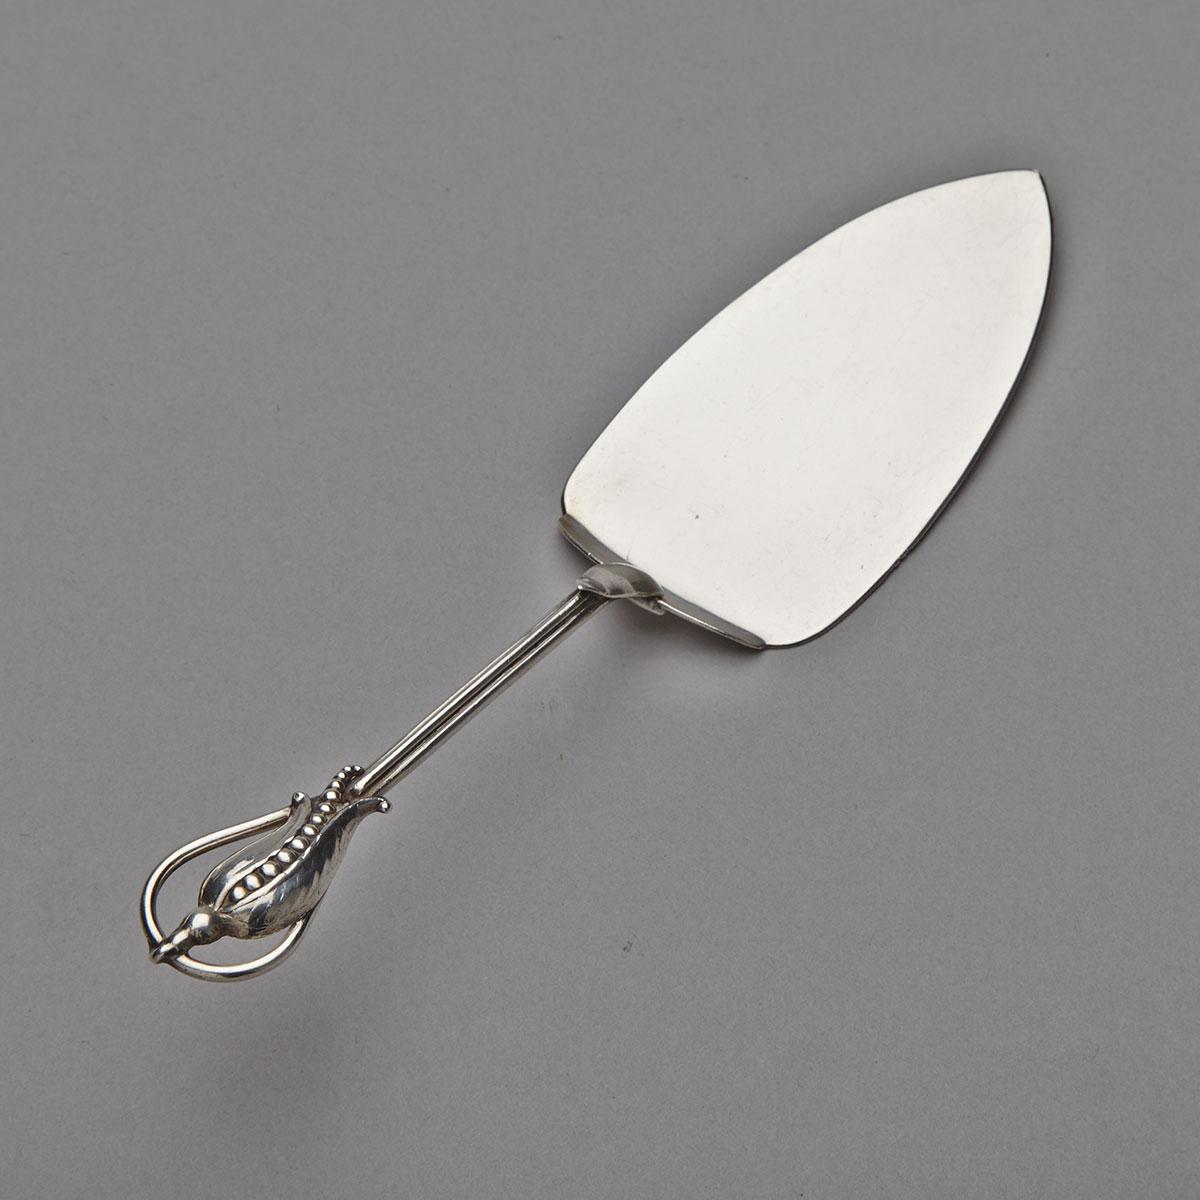 Canadian Silver Blossom Pattern Pie Server, Carl Poul Petersen, Montreal, Que., mid-20th century